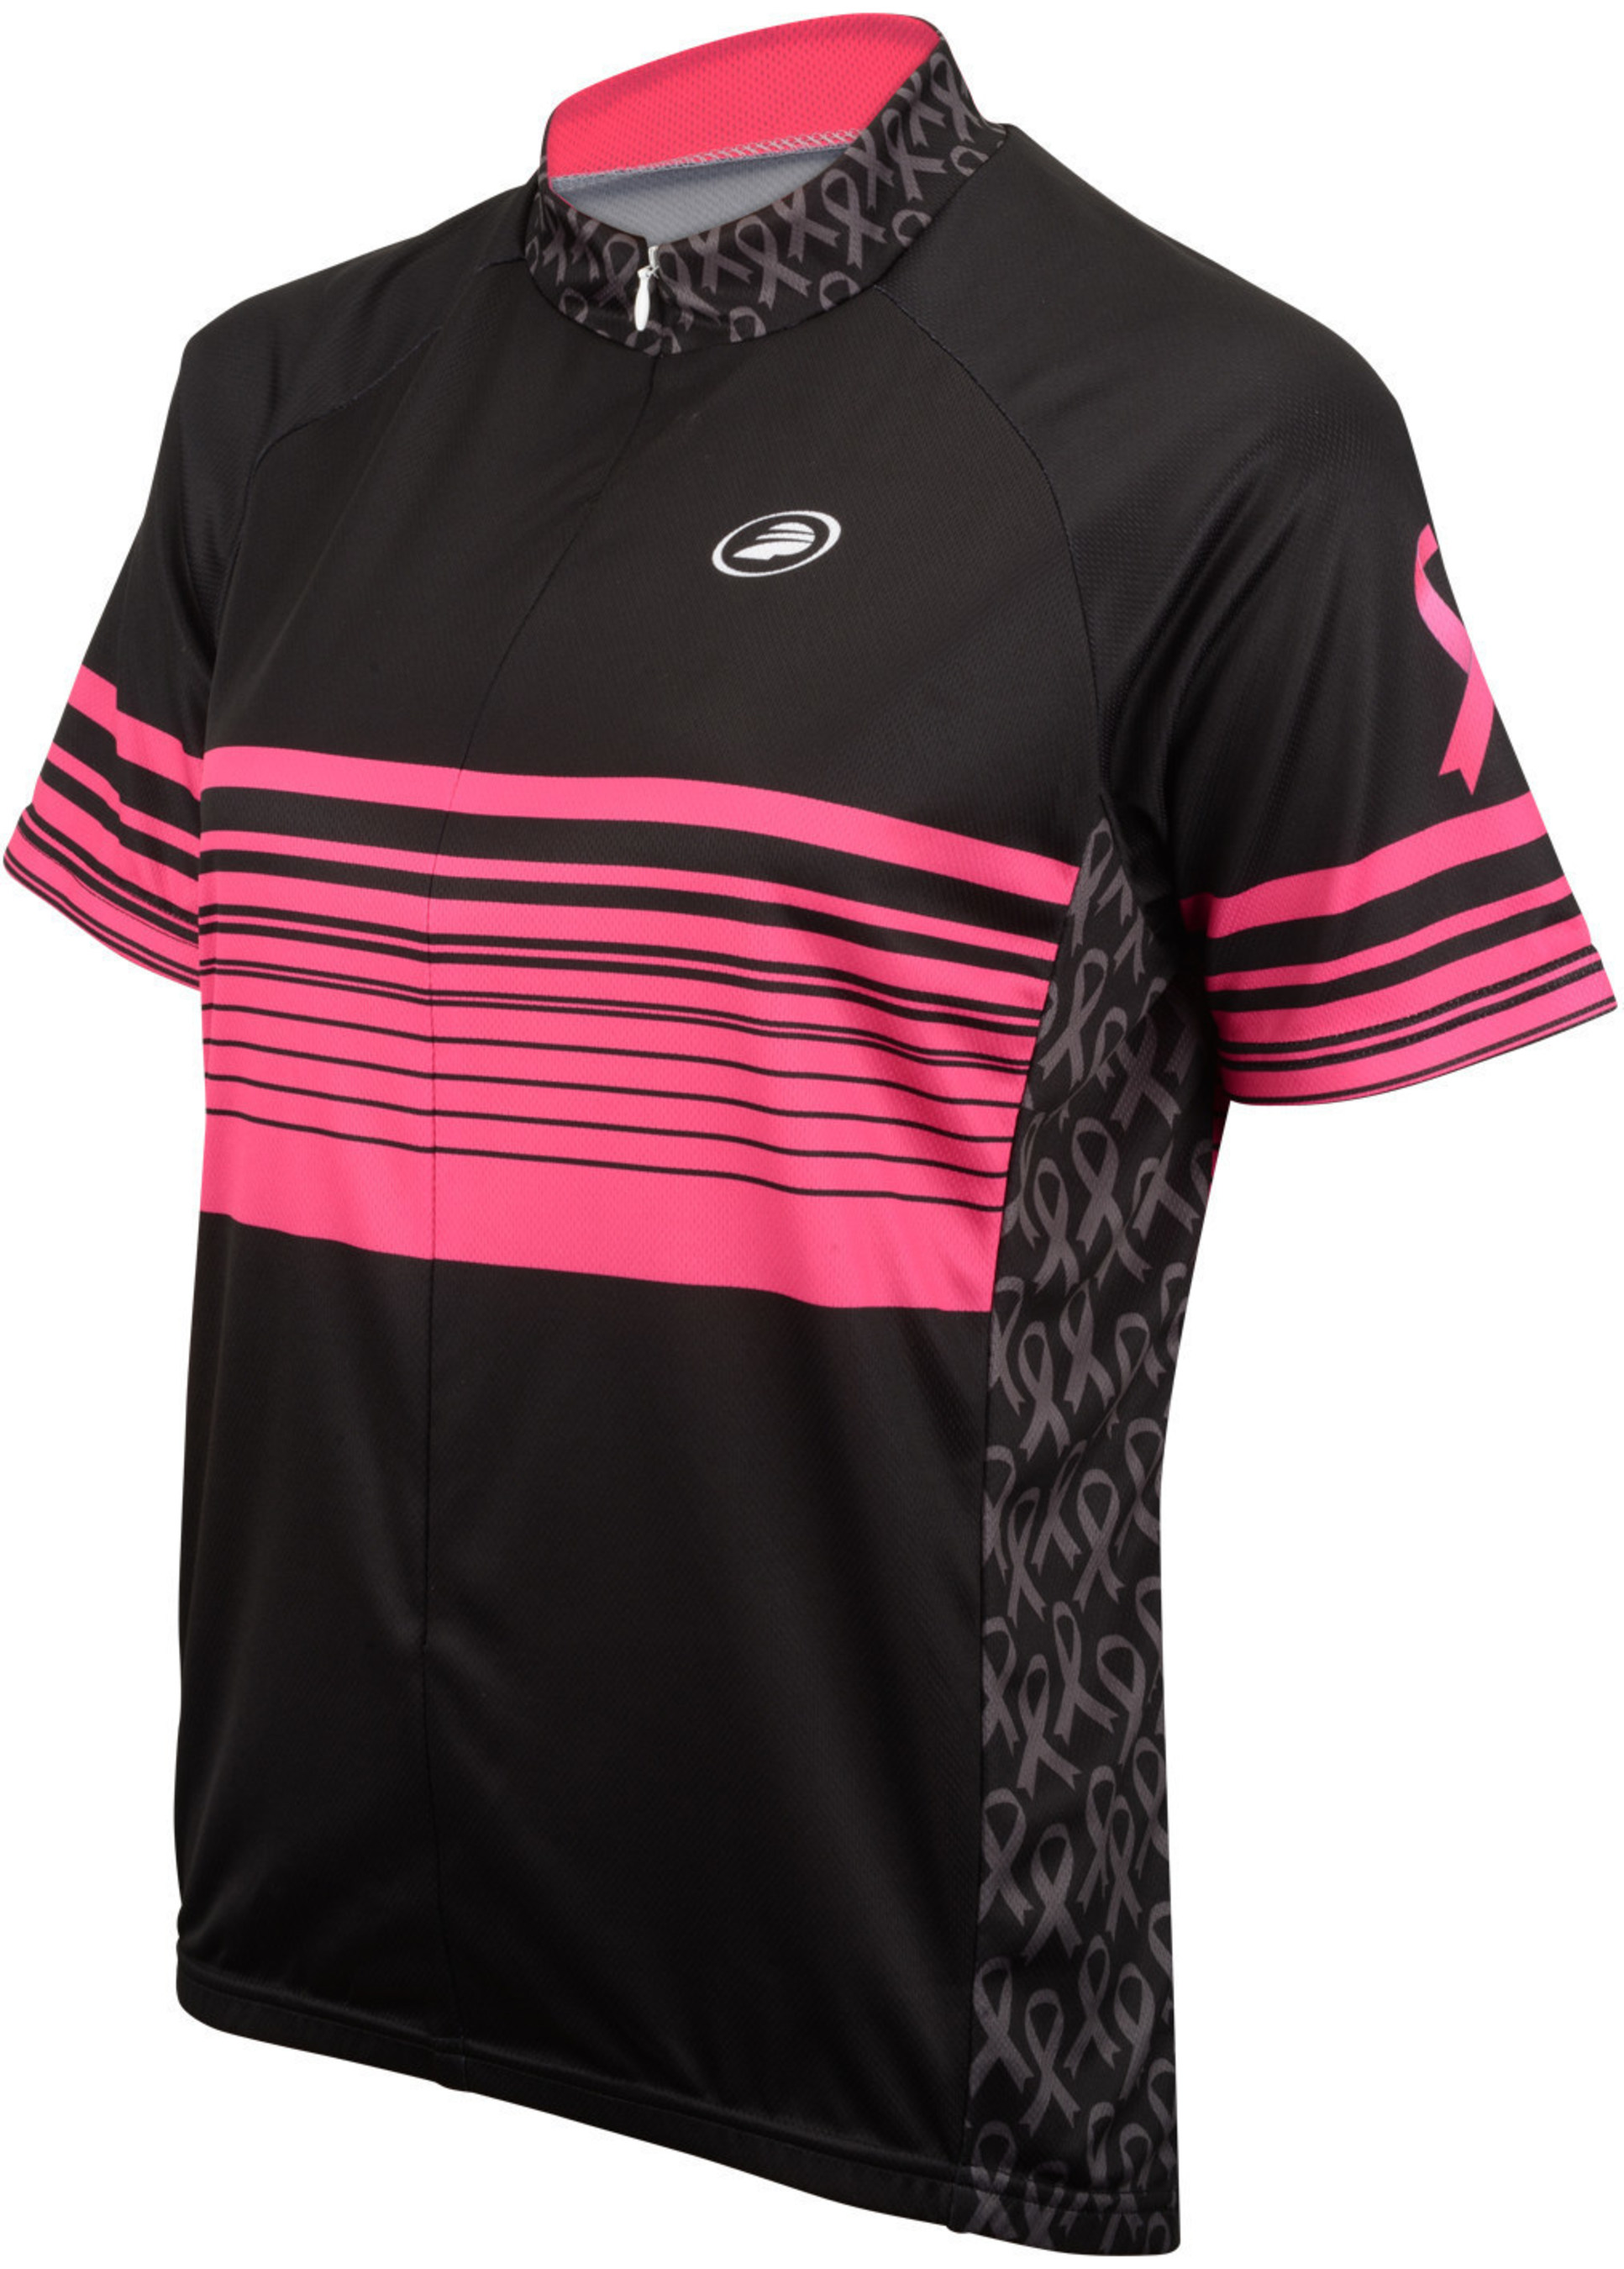 Performance Breast Cancer Short Sleeve Jersey